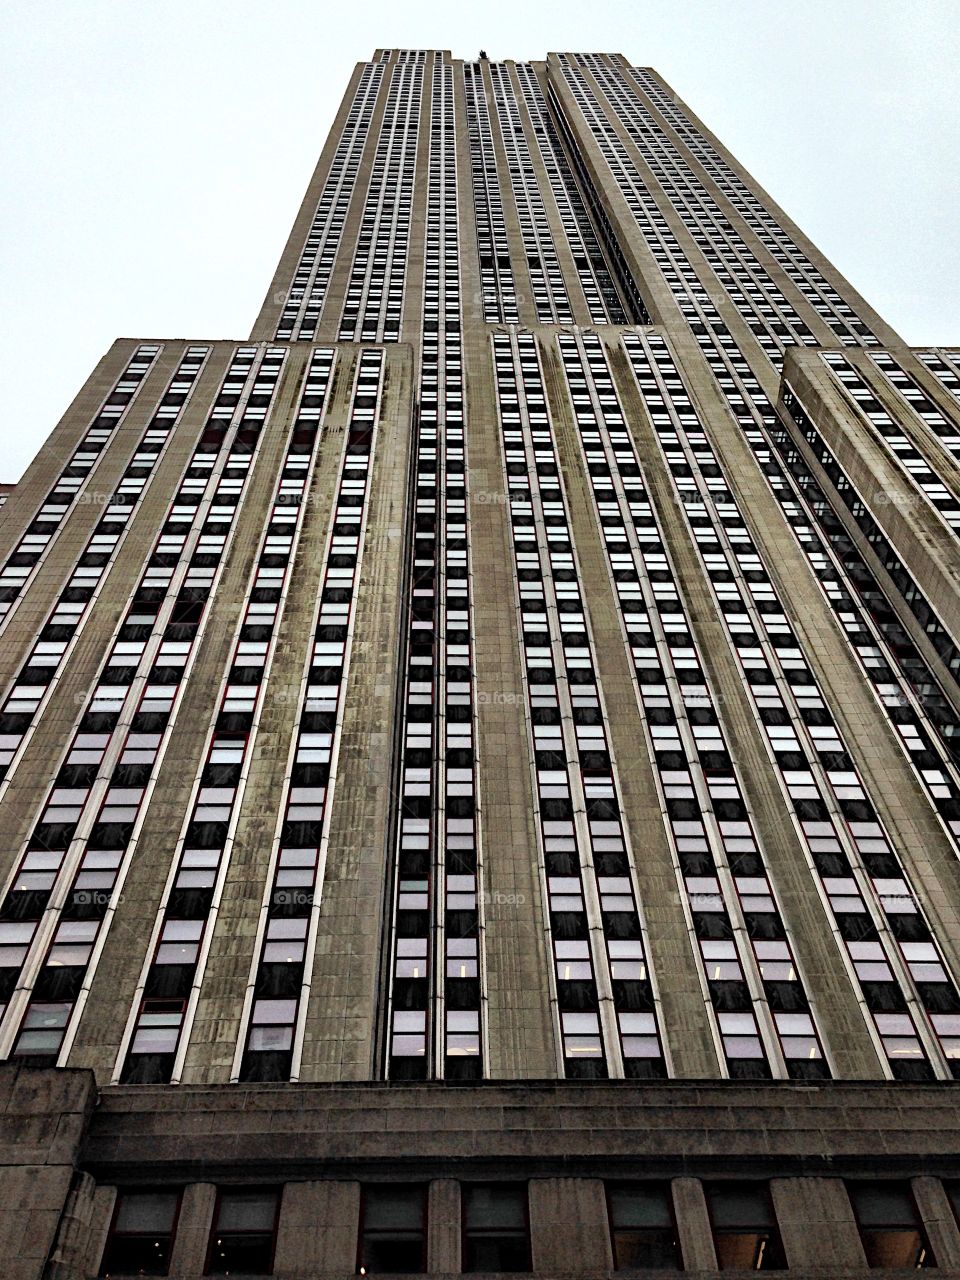 View from below of the Empire state building,  New York. USA